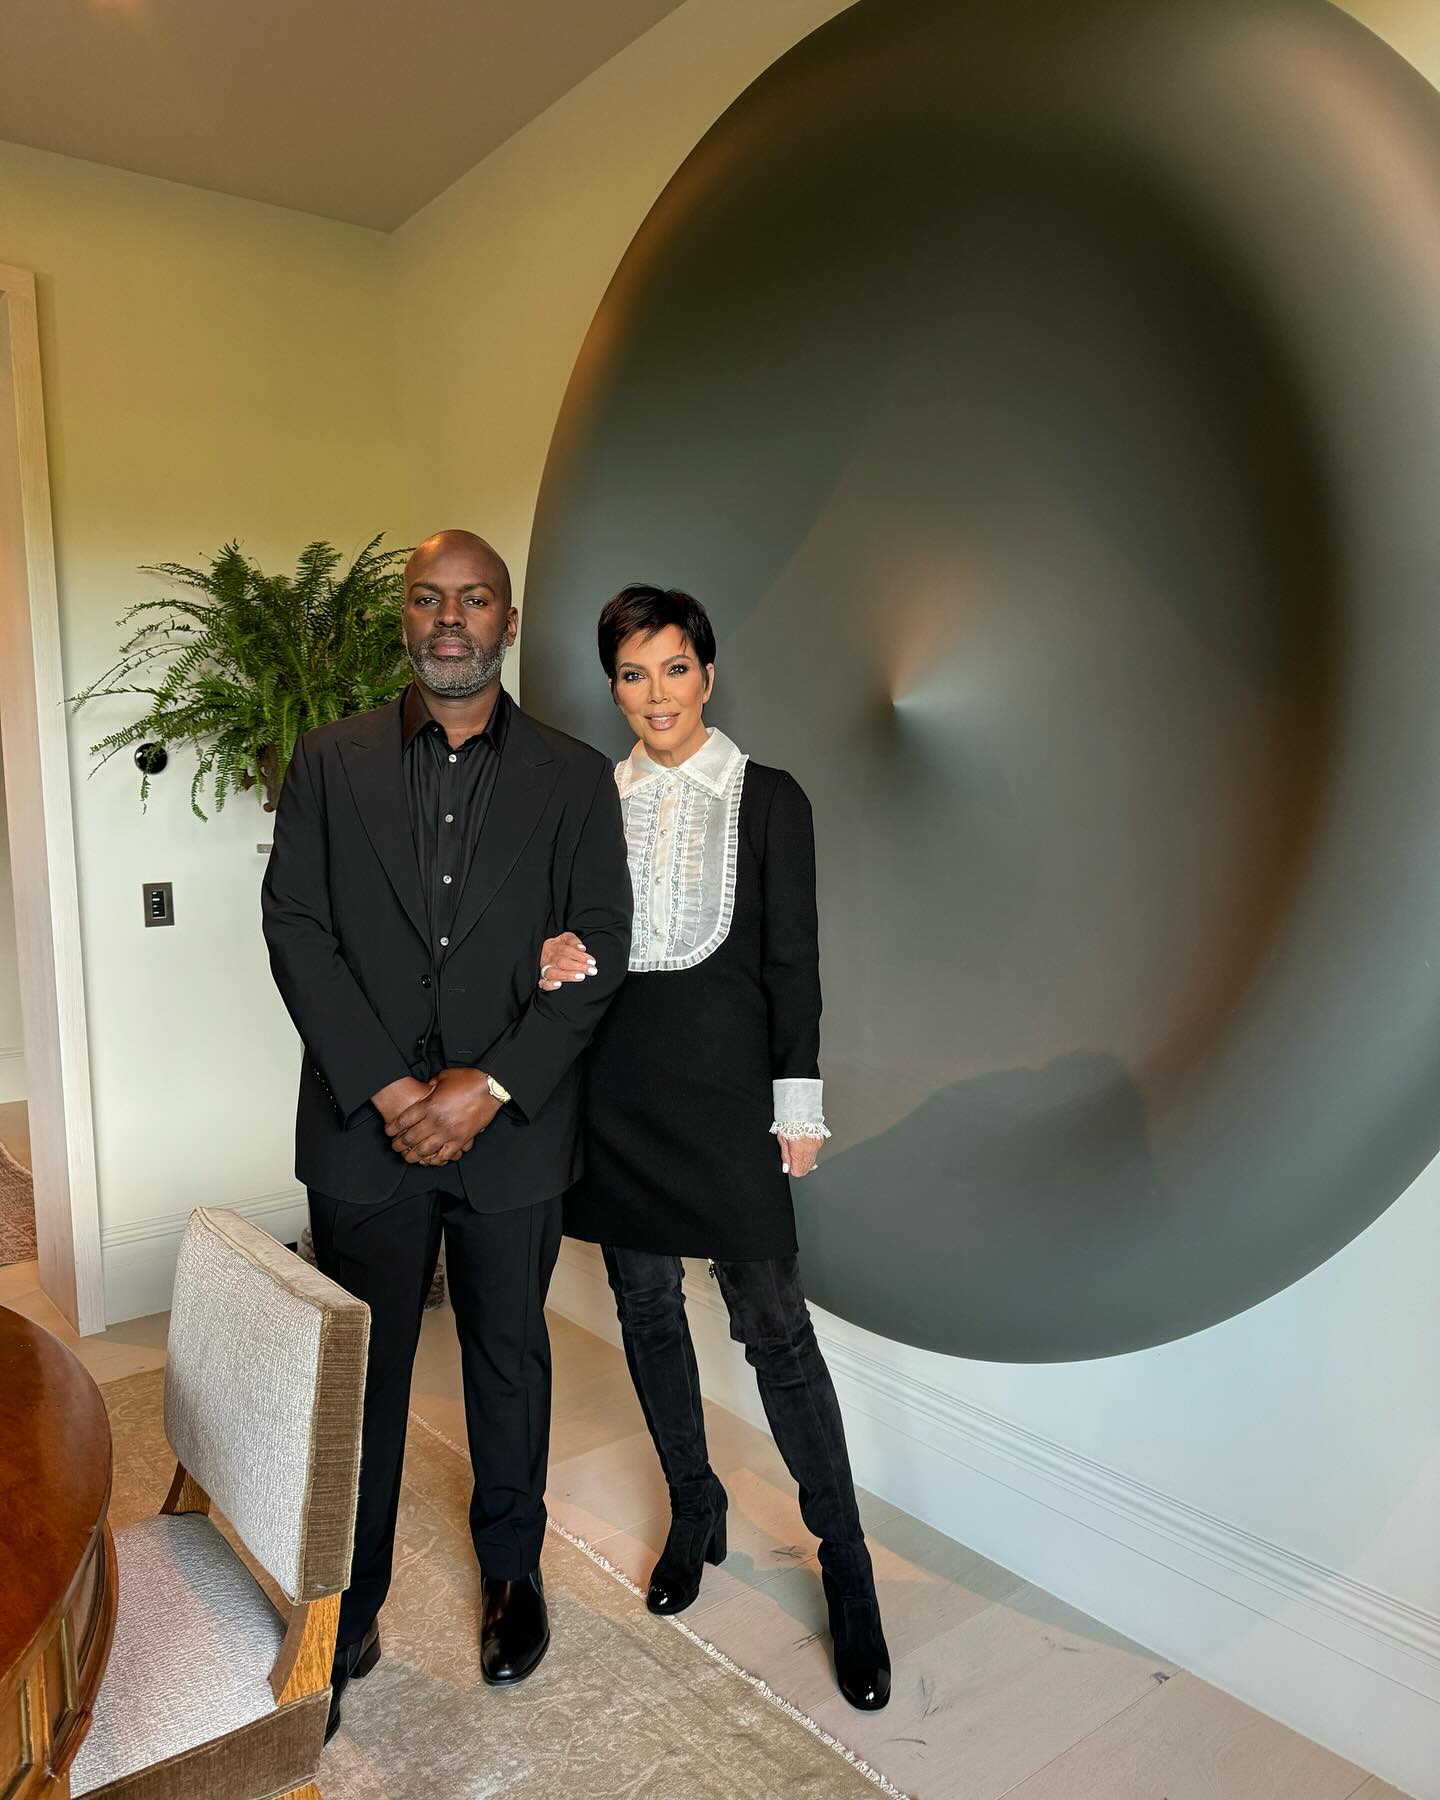 Many fans accused Kris of taking the weight loss drug Ozempic in a pic with Corey Gamble